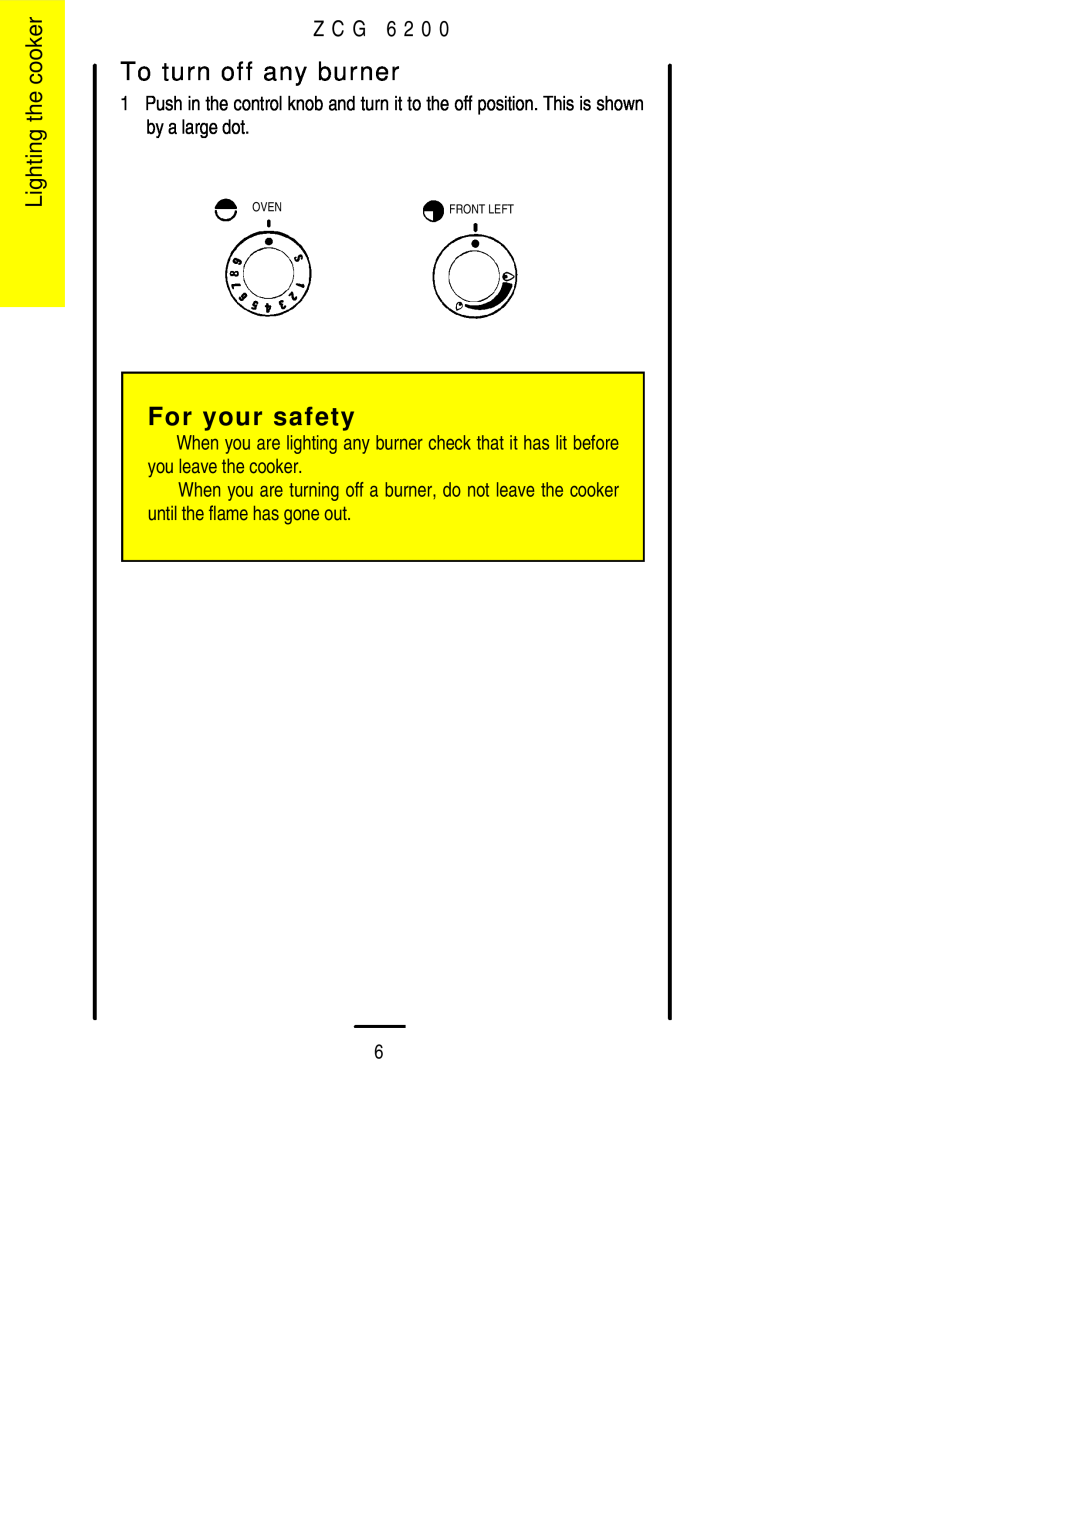 Zanussi ZCG 6200 installation instructions To turn off any burner, For your safety, Lighting the cooker, Z C G 